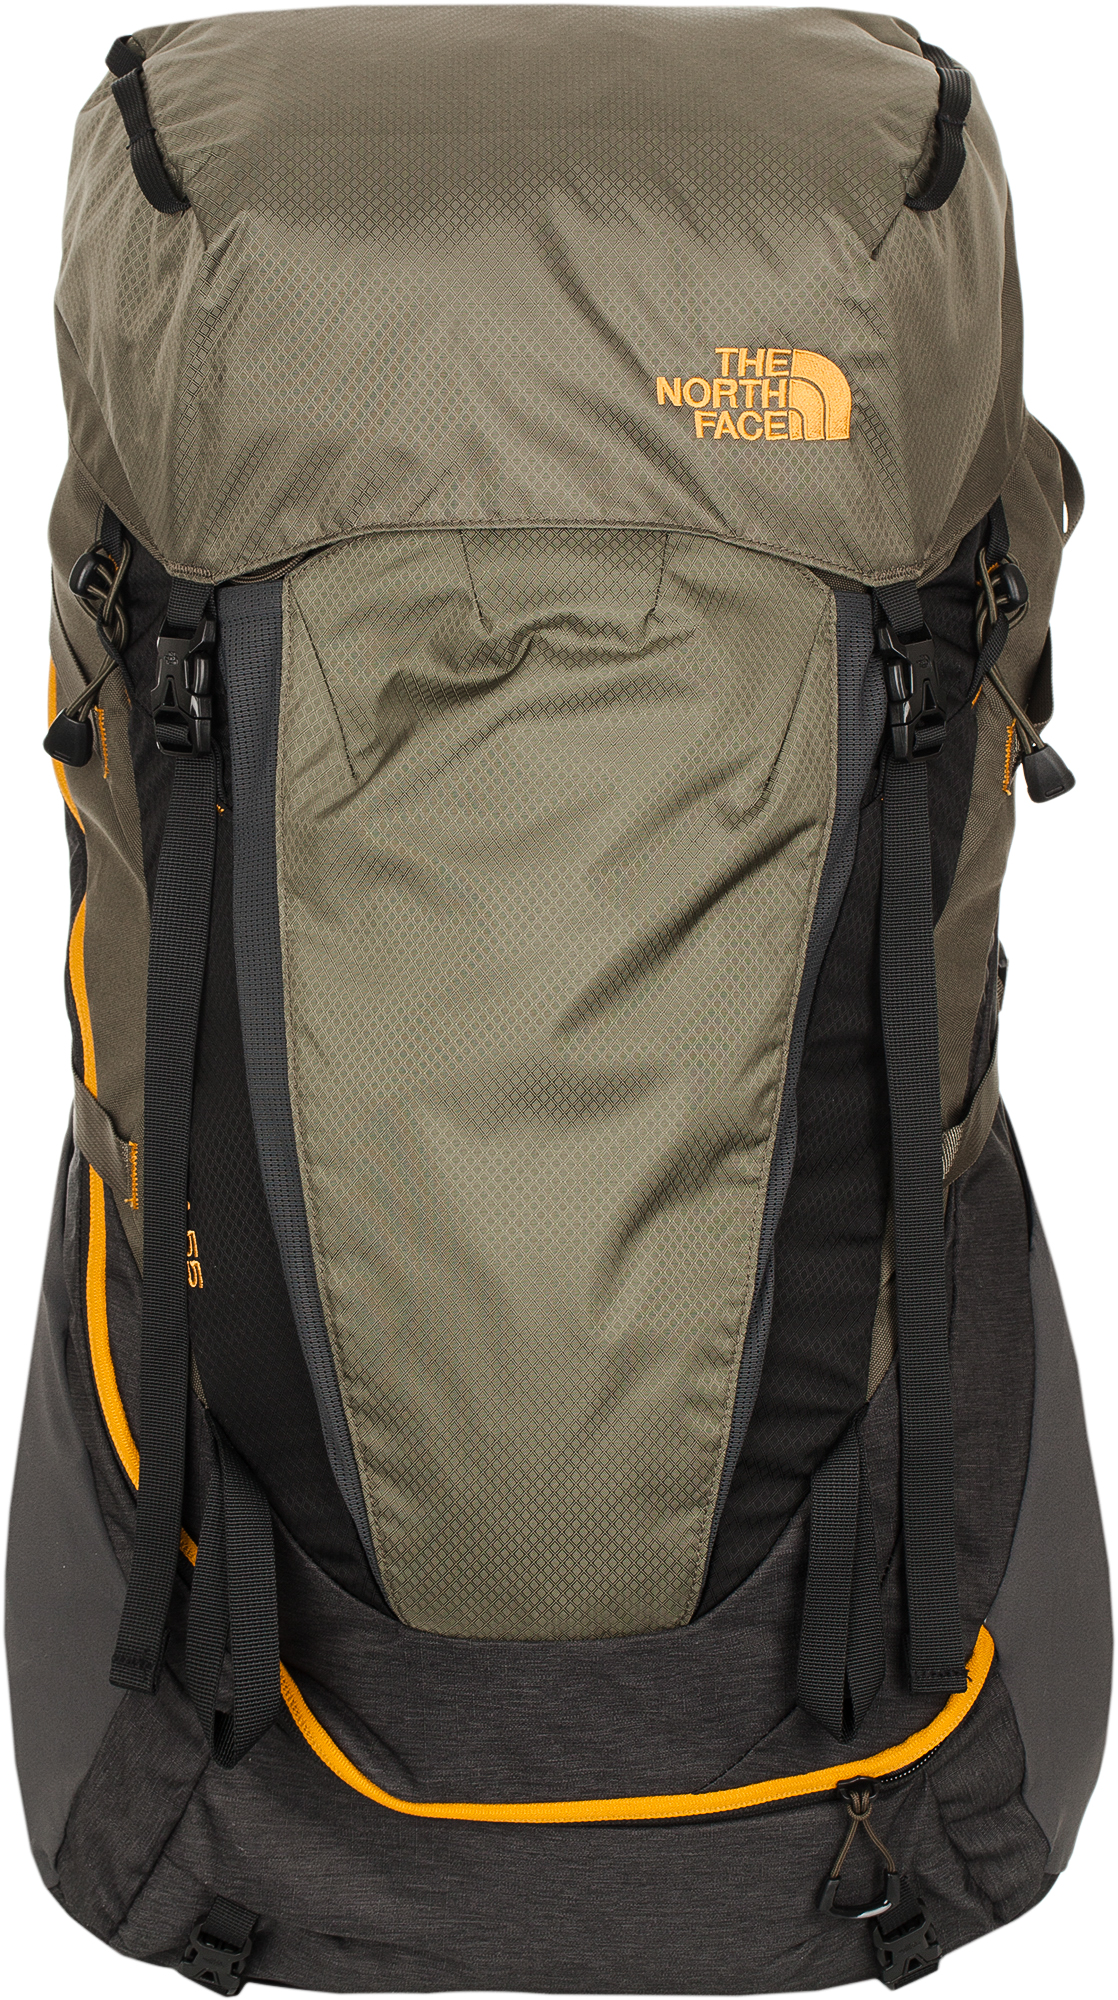 The North Face The North Face Terra 55